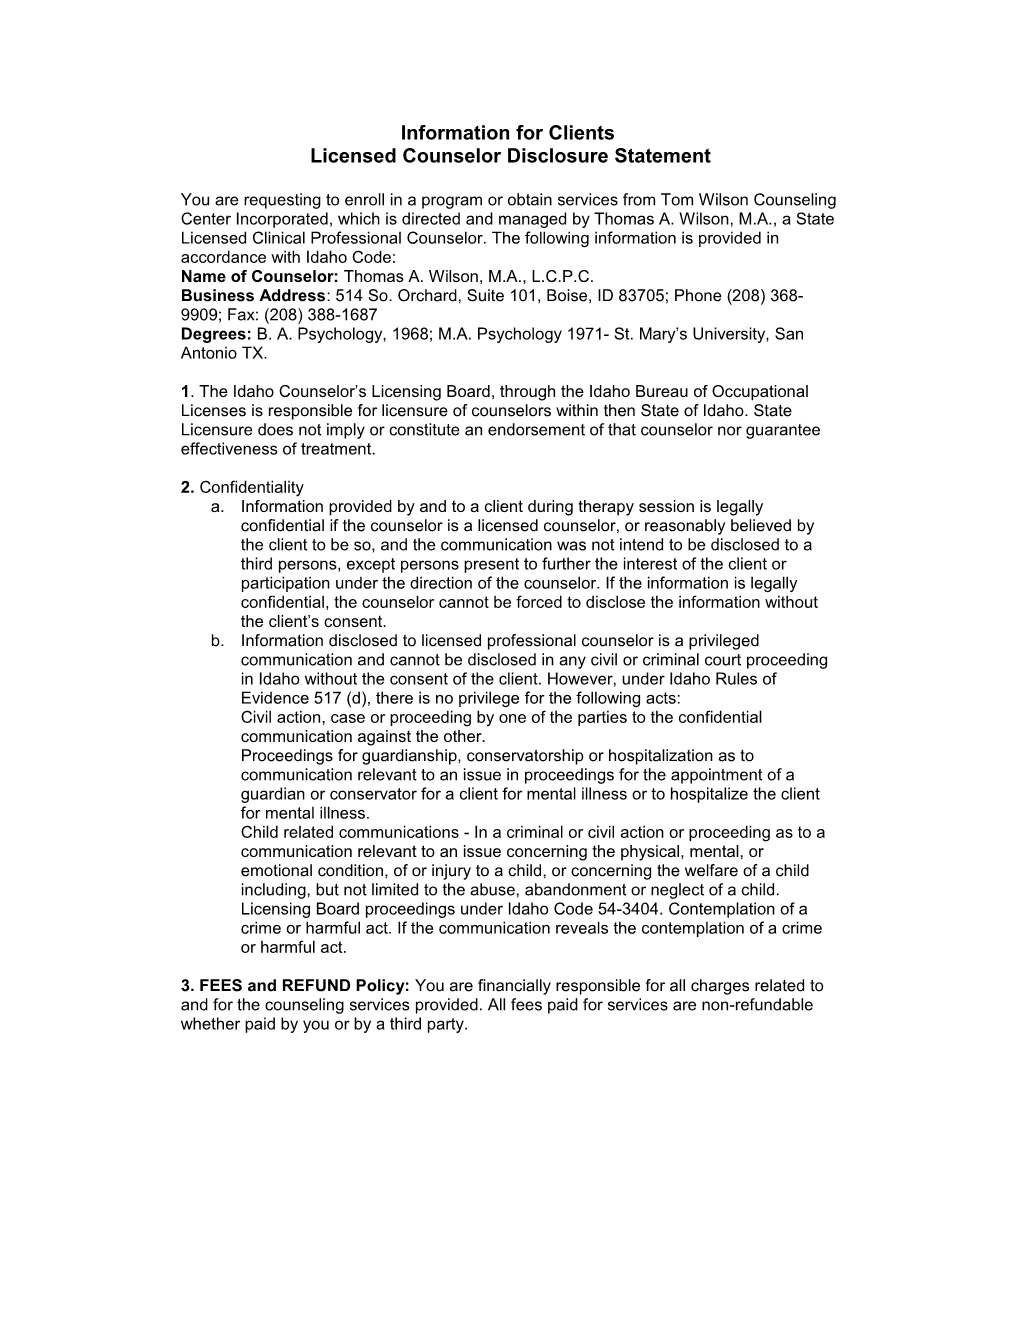 Information for Clients- Licensed Counselor Disclosure Statement